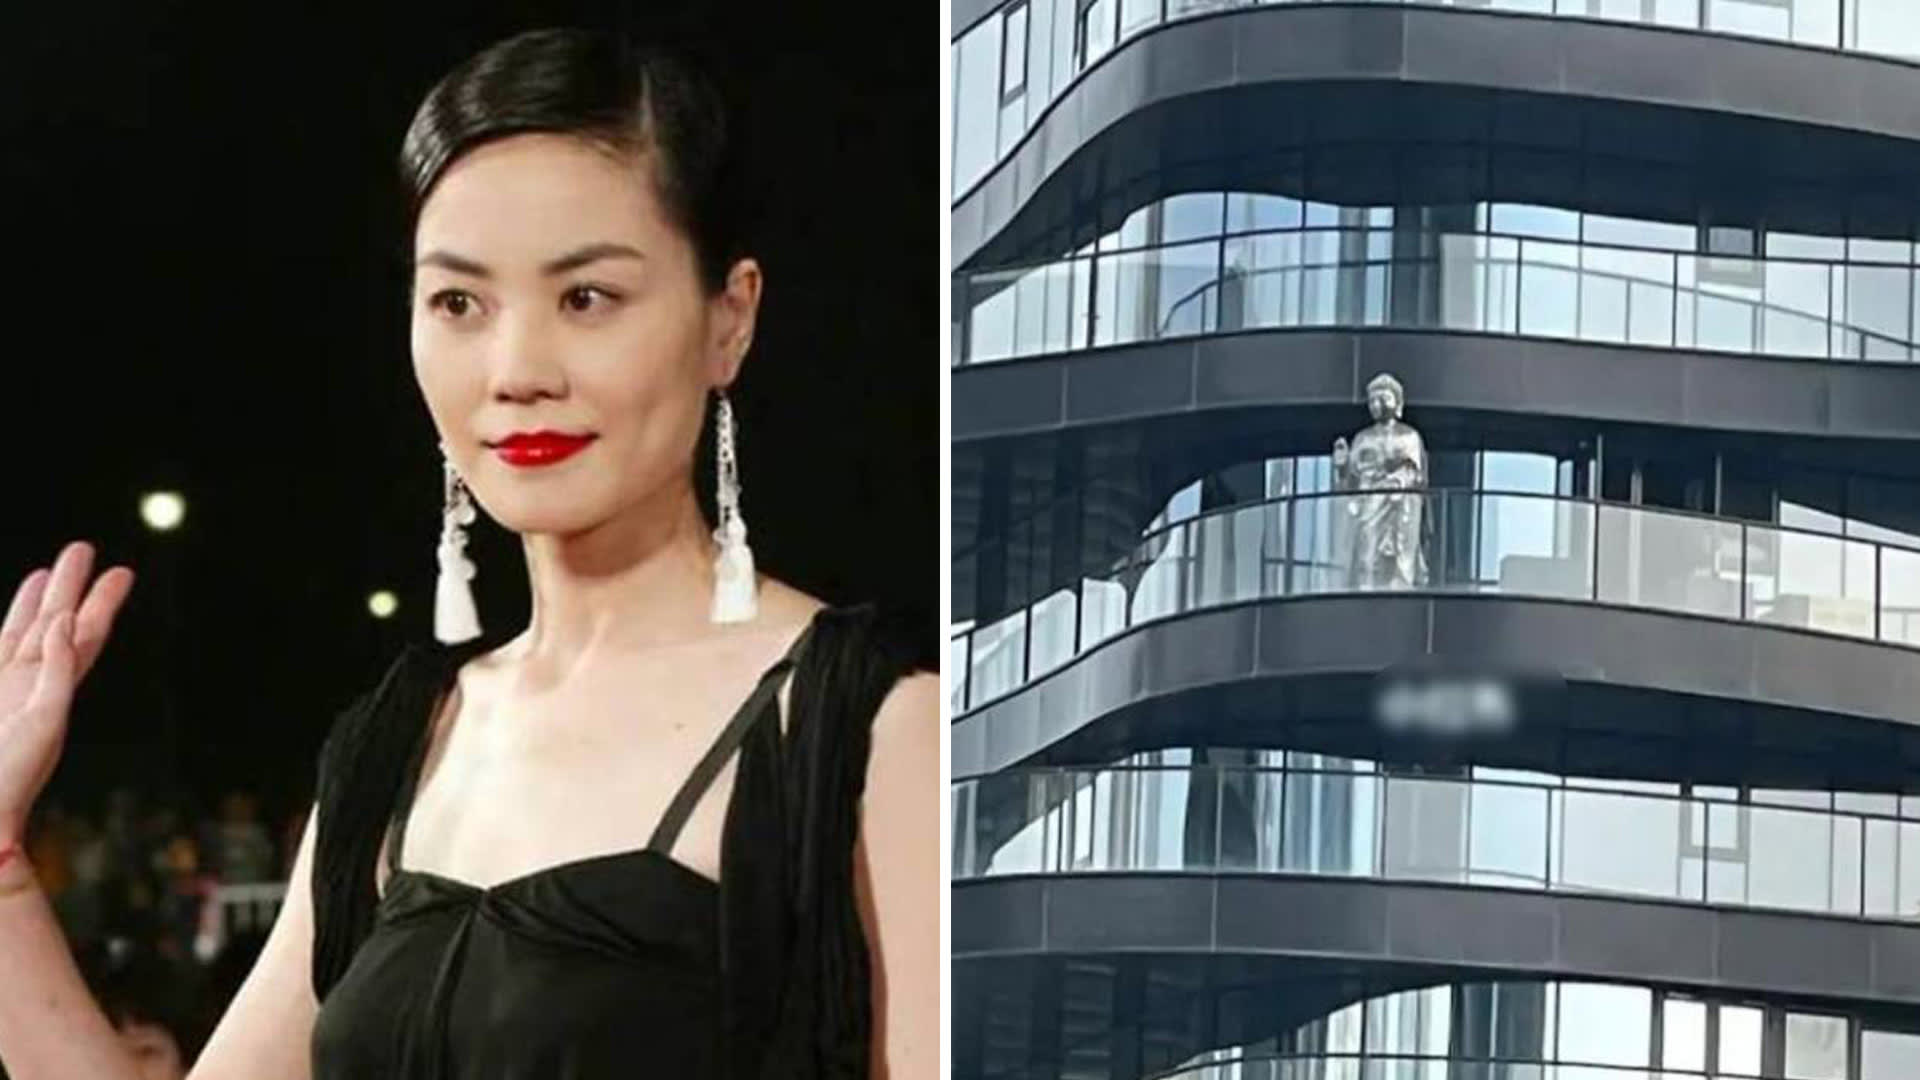 Netizen Claims Faye Wong Has A 2m-Tall Statue Of Buddha On The Balcony Of Her S$17.5mil Apartment